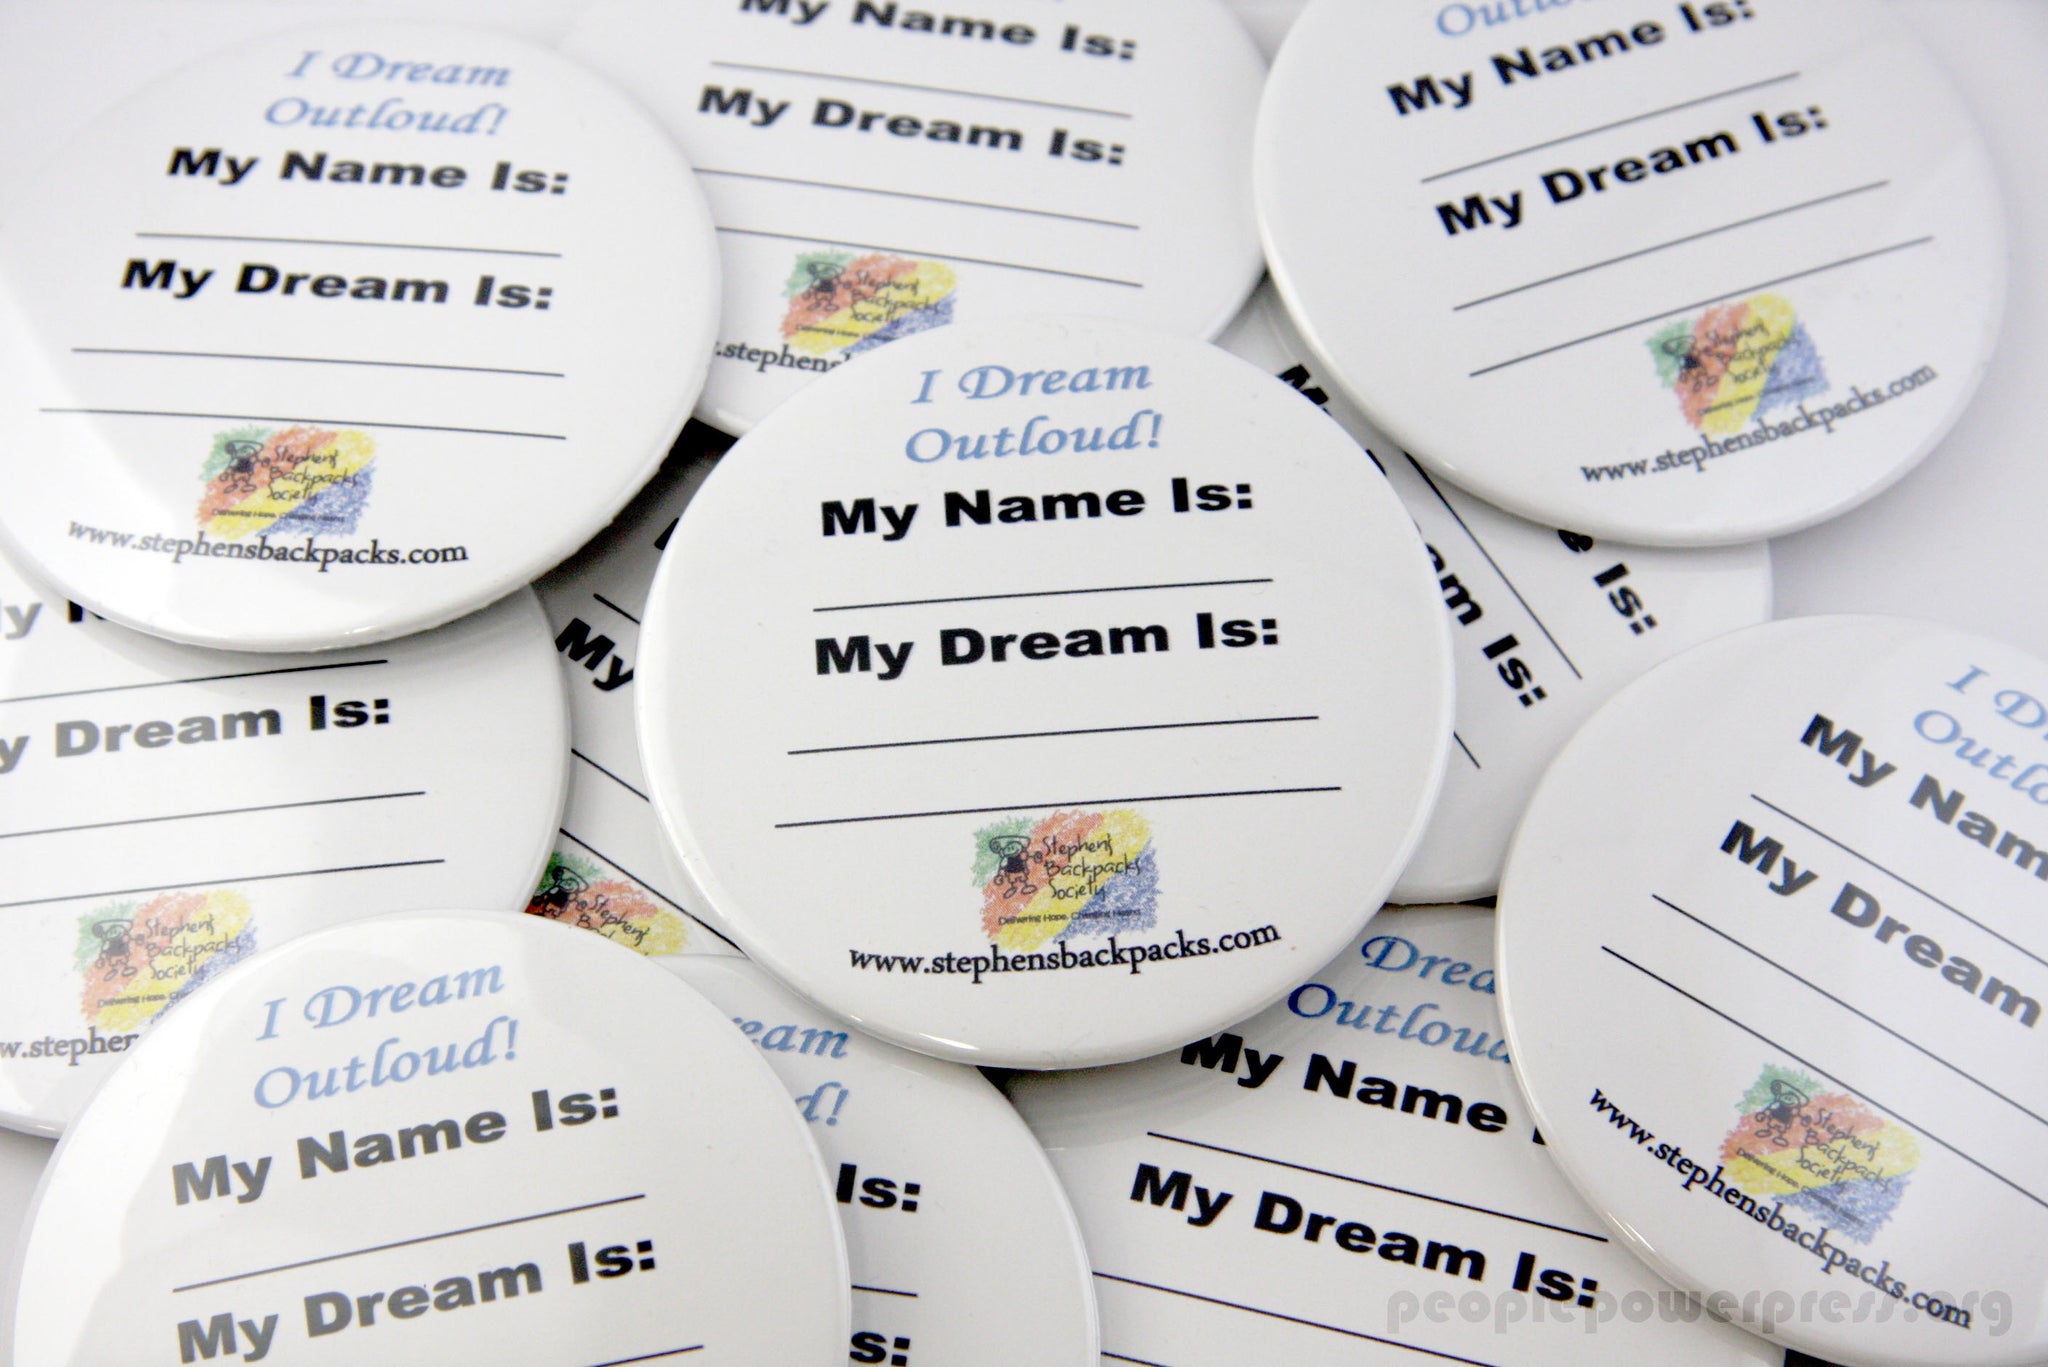 Dream Buttons, Custom Buttons by People Power Press, People Power Award 2016